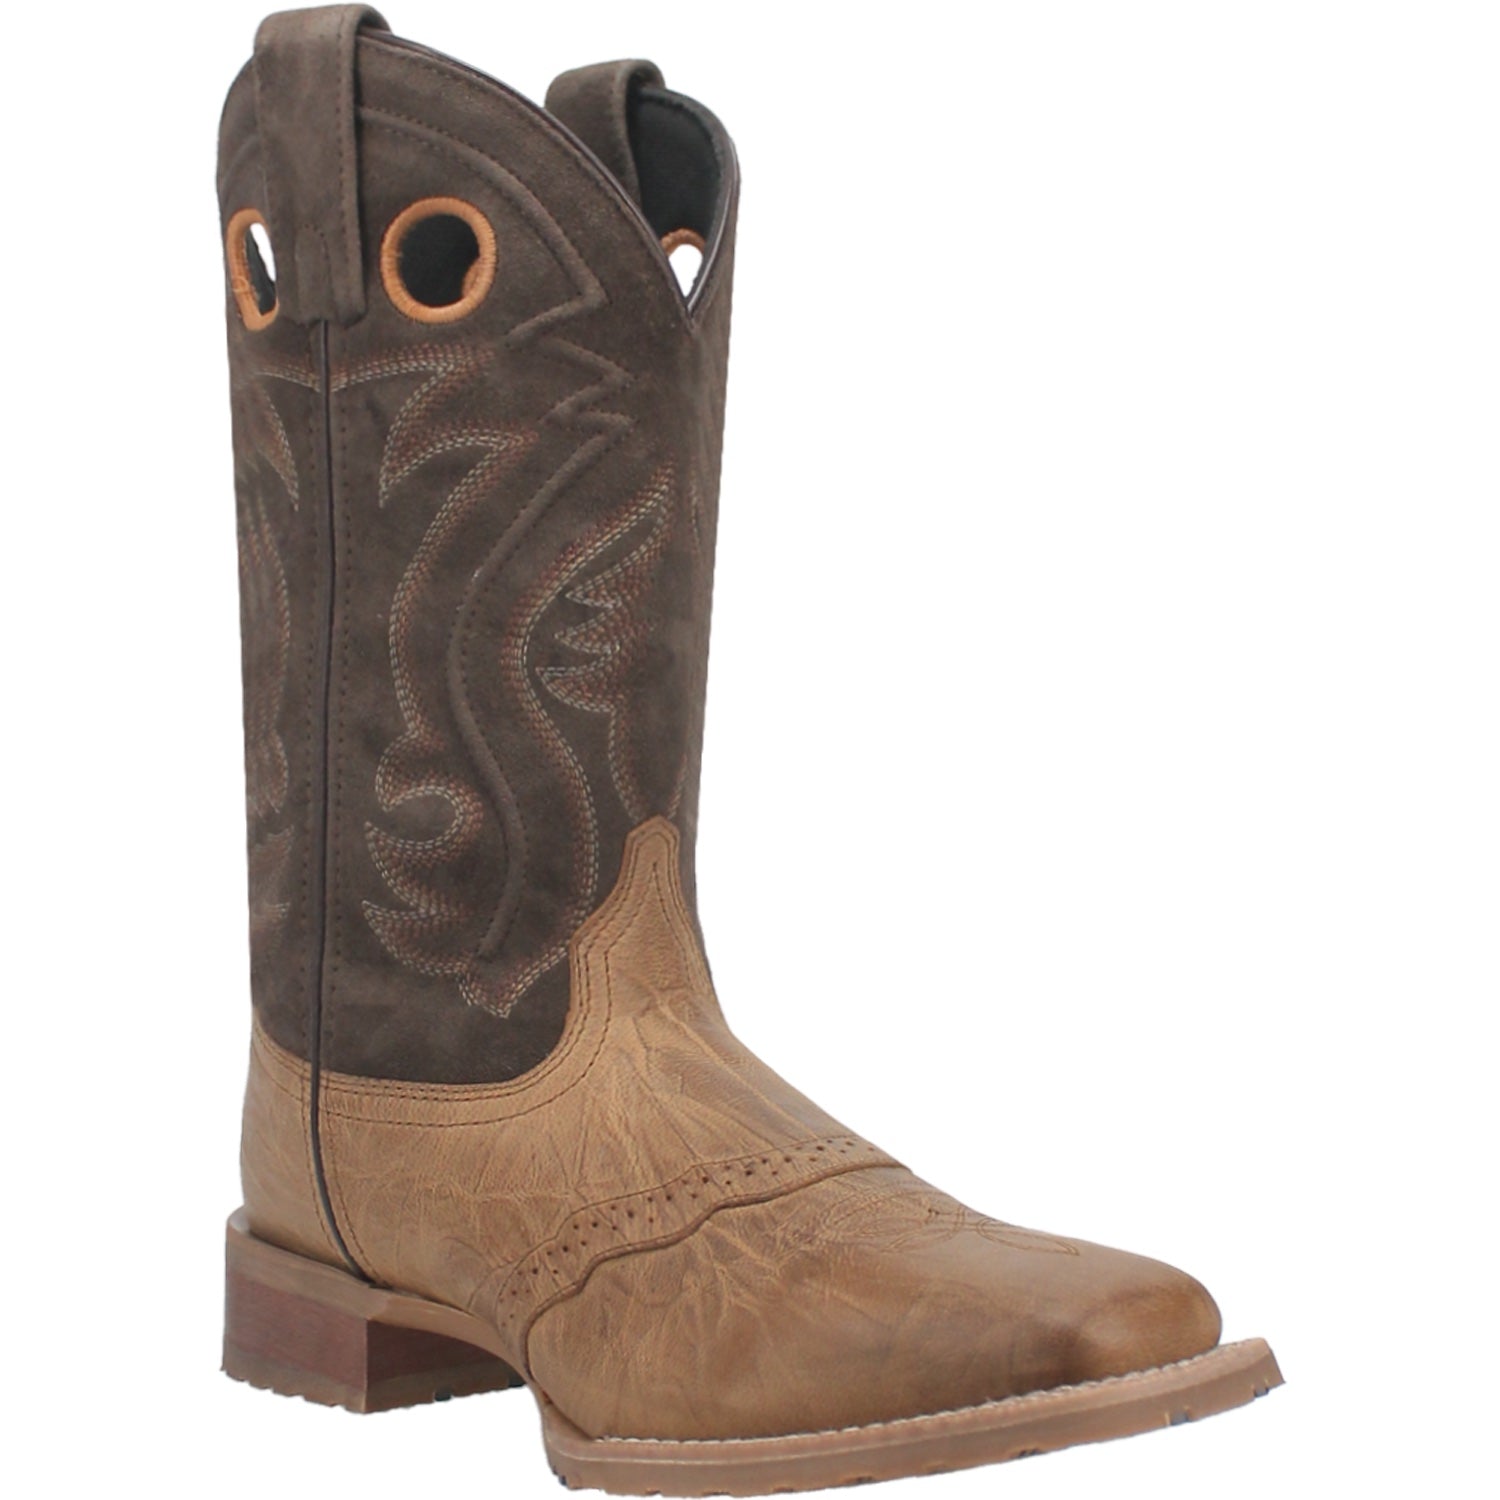 JENNINGS LEATHER BOOT Cover